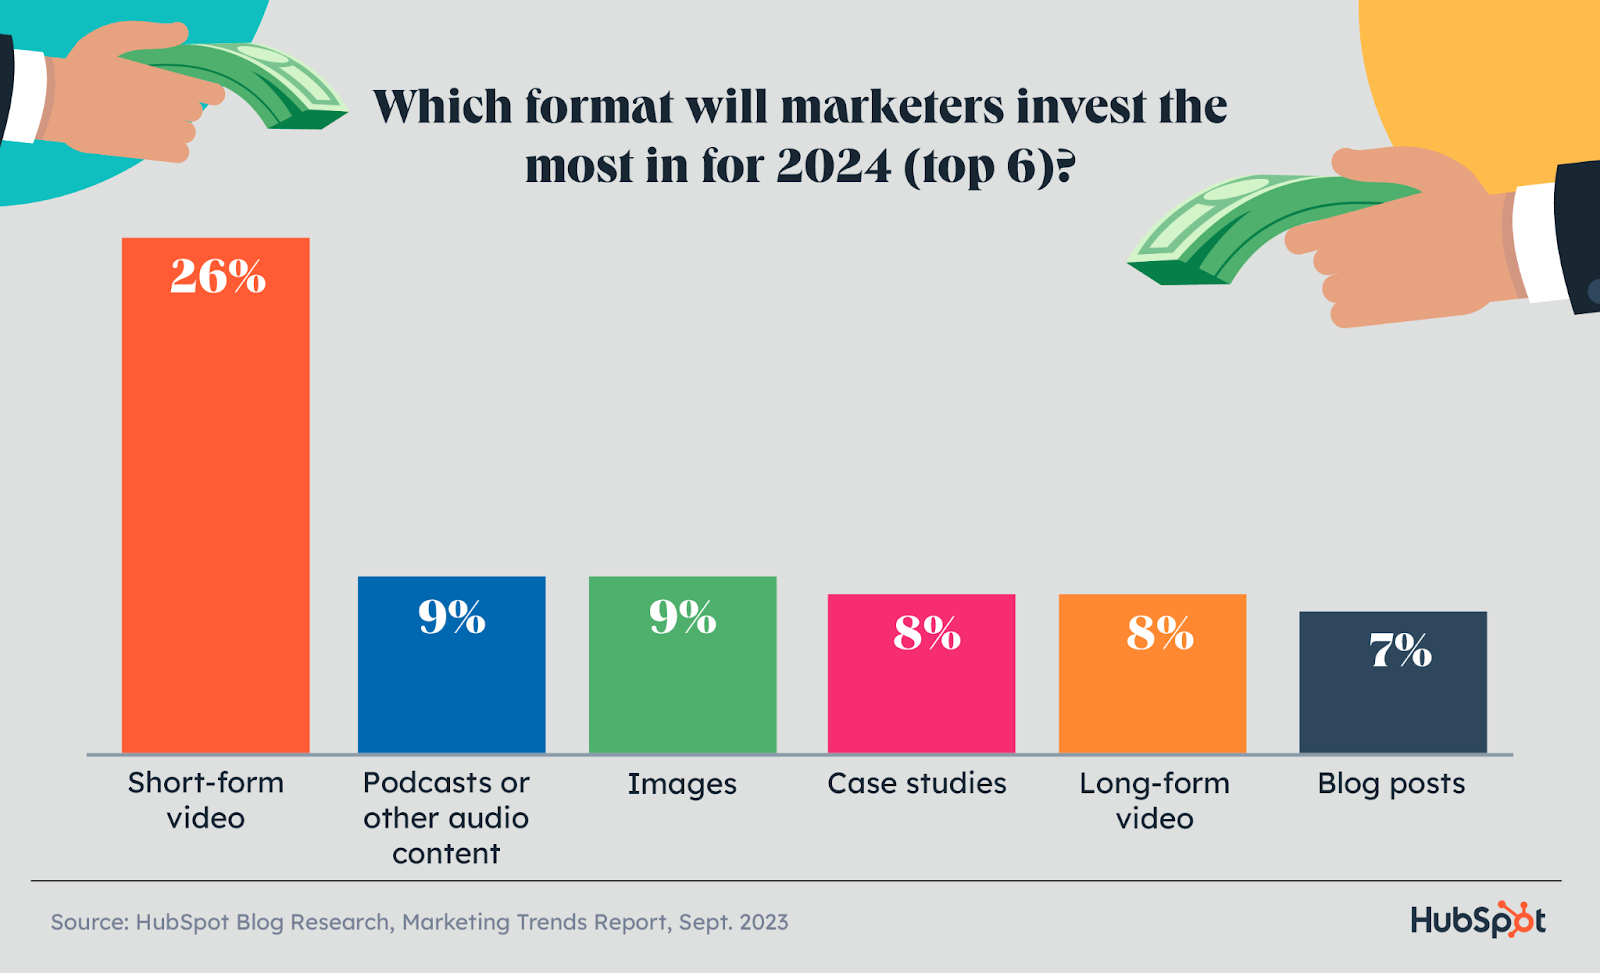 short form video will receive the most marketing investment compared to other types of content in 2024